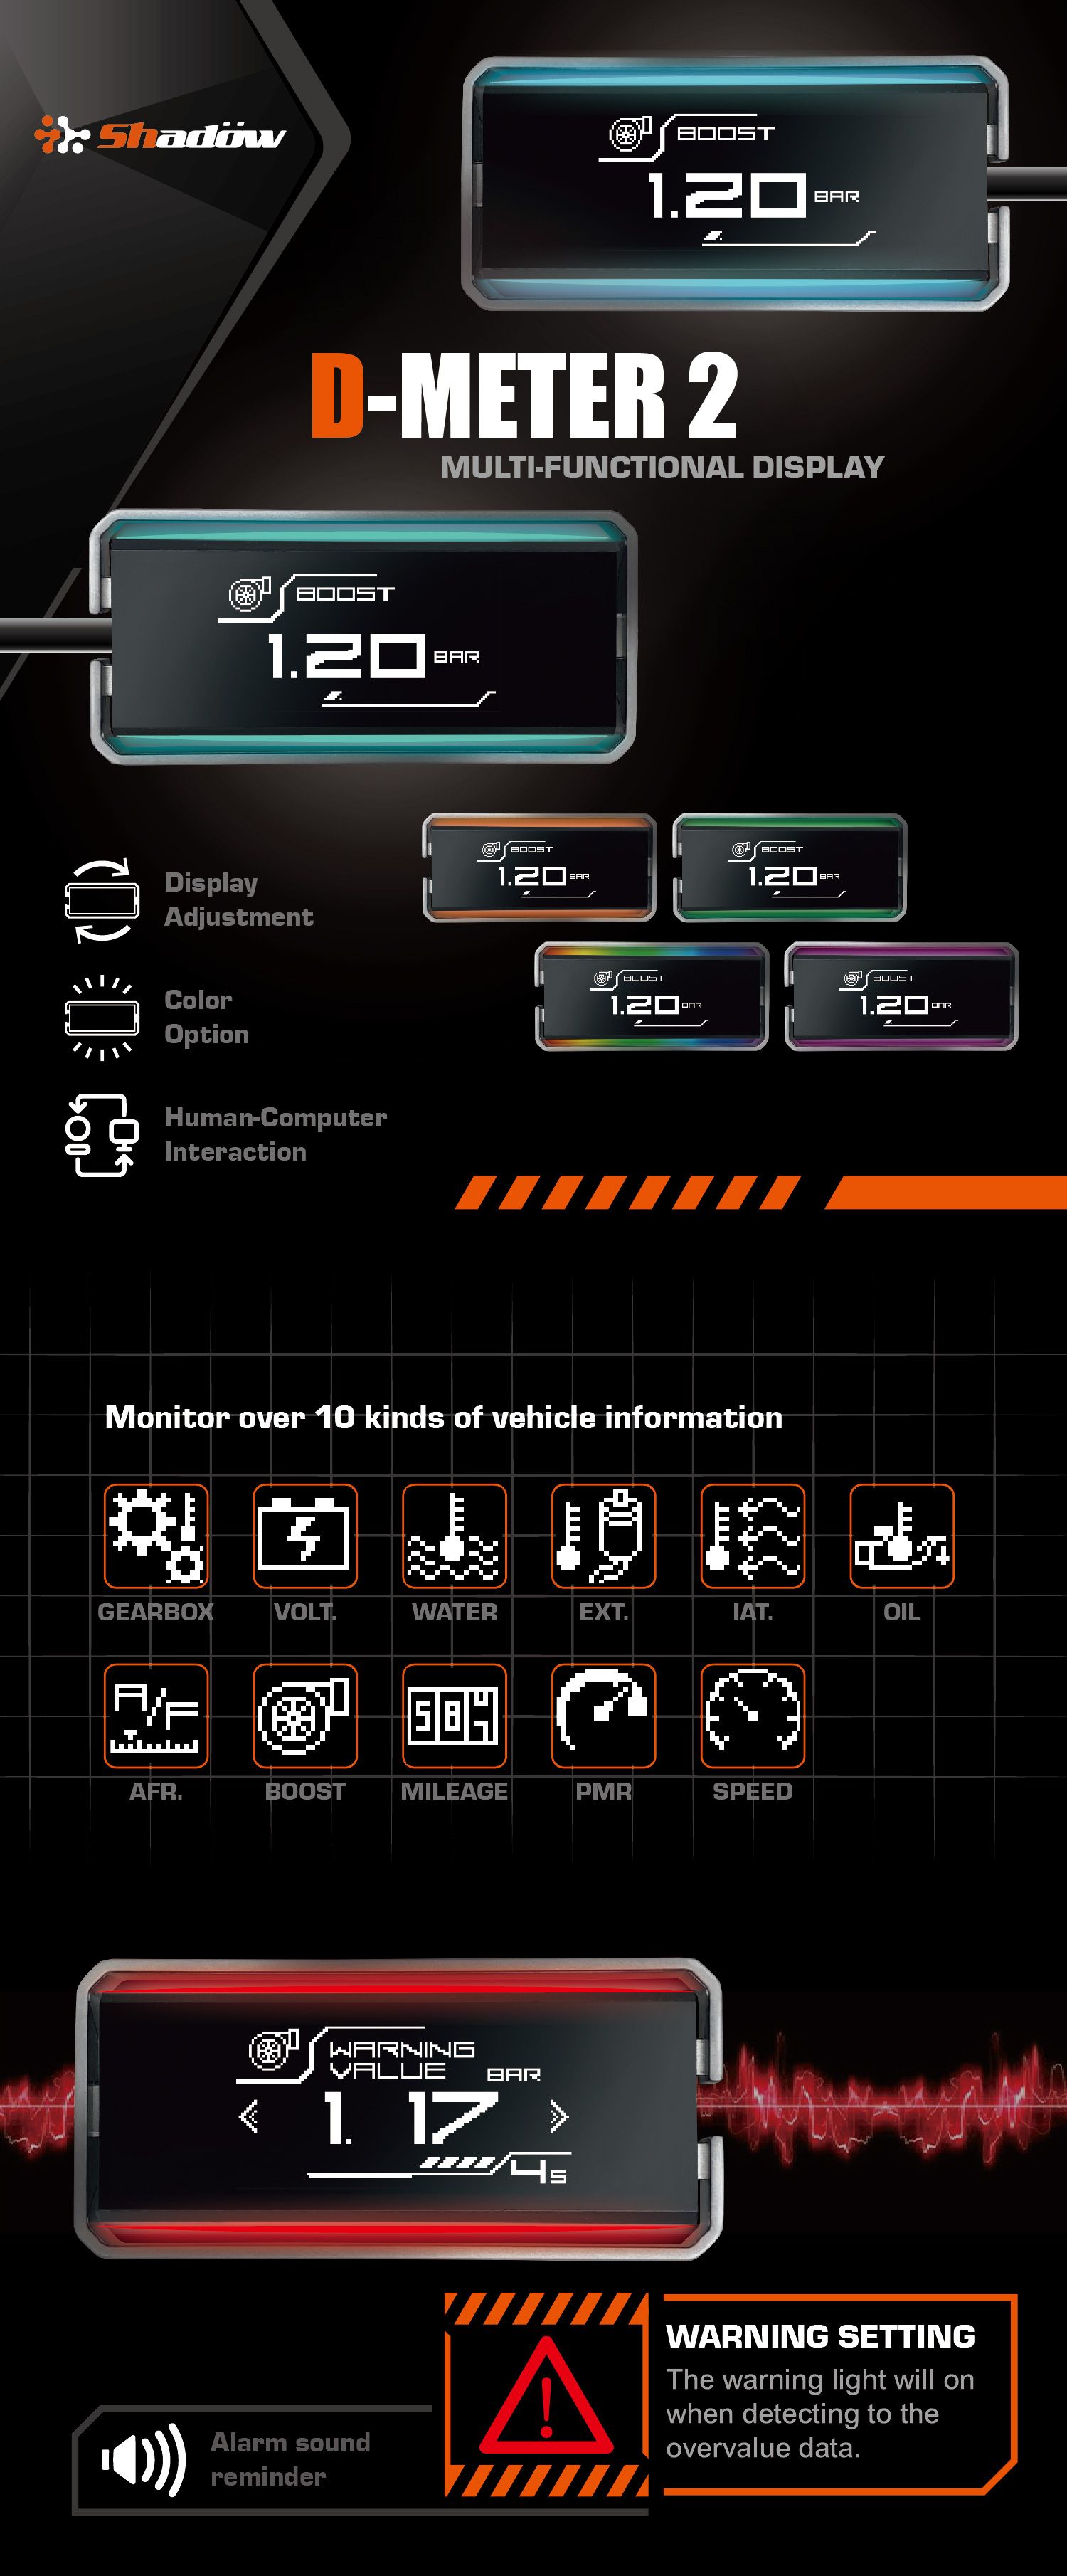 D-METER 2 can monitor over 10 kinds of vehicle information